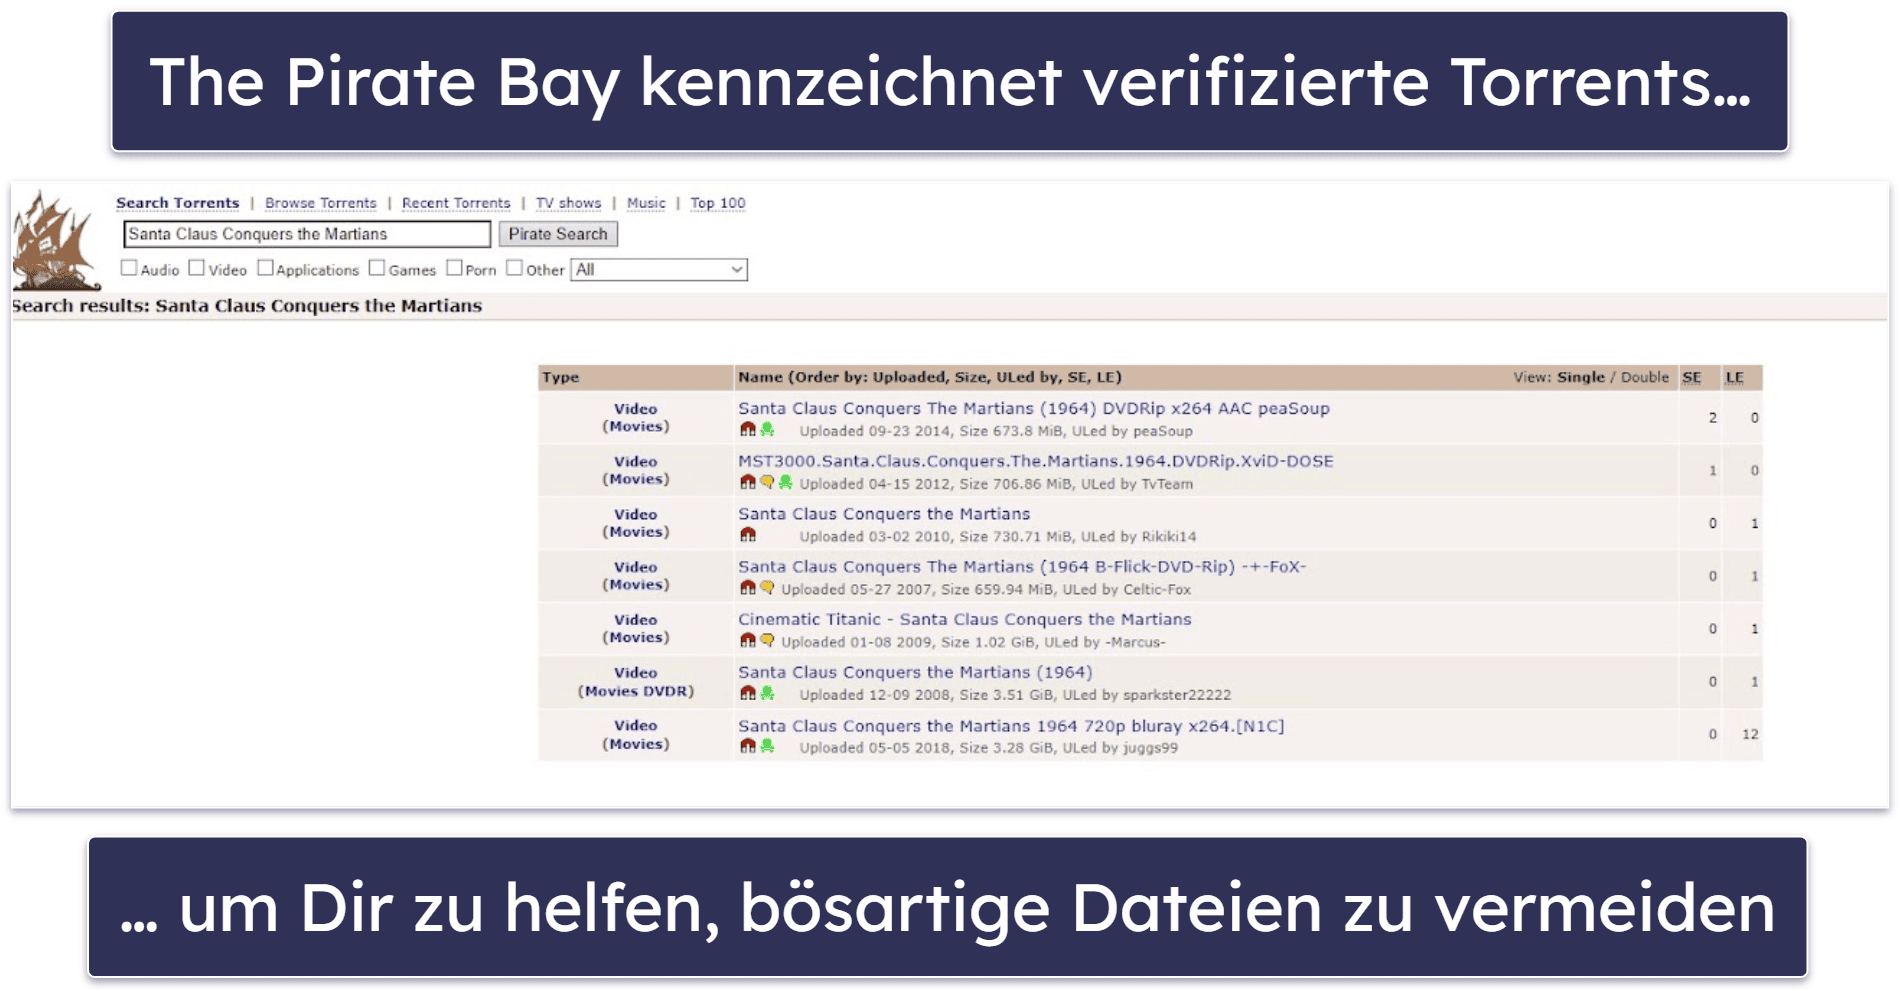 3. The Pirate Bay